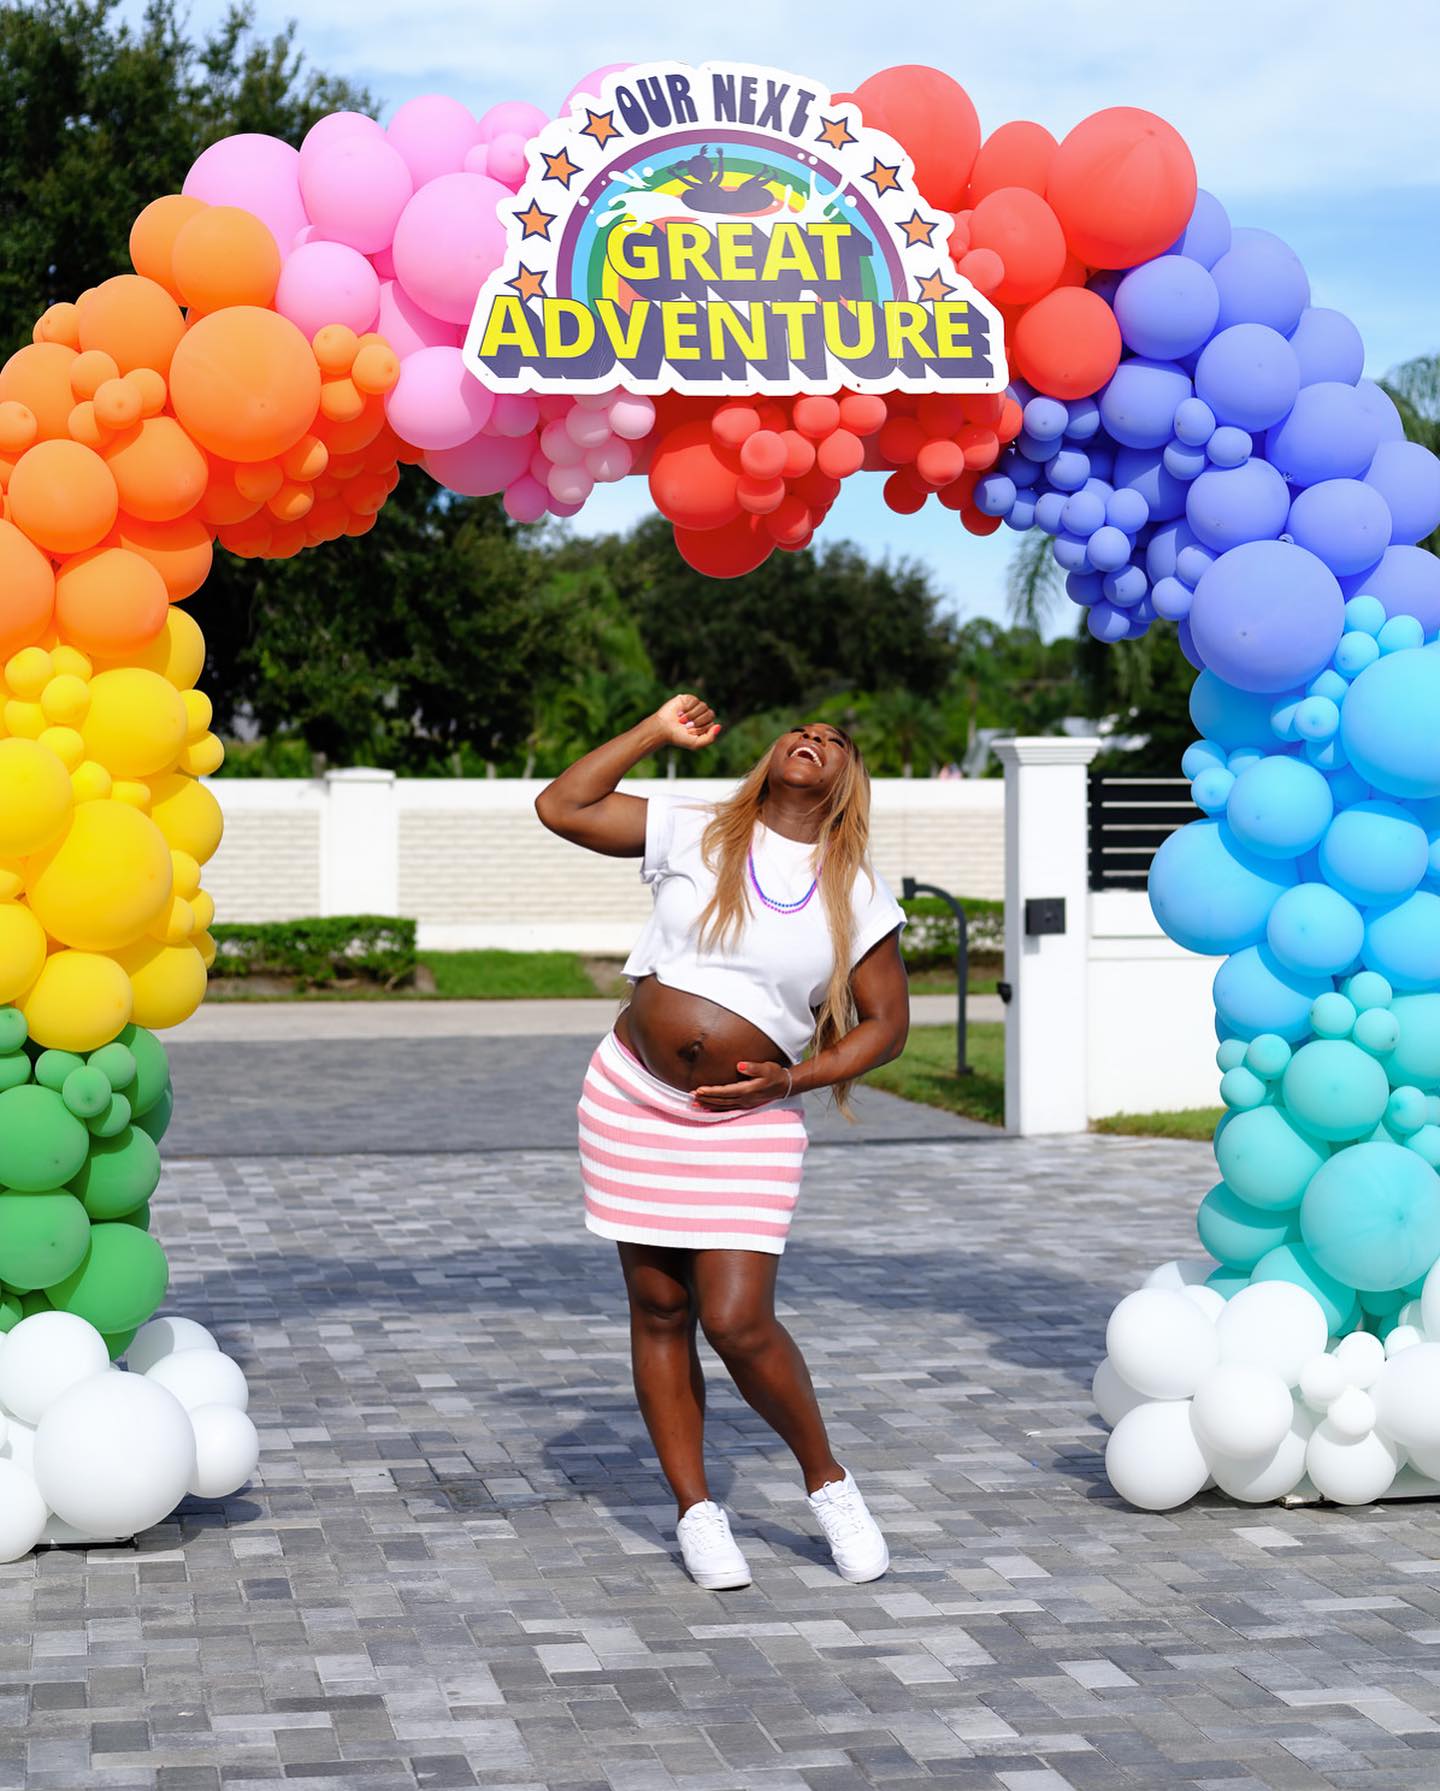 Photos n°2 : Serena Williams Shares Her Big Reveal!